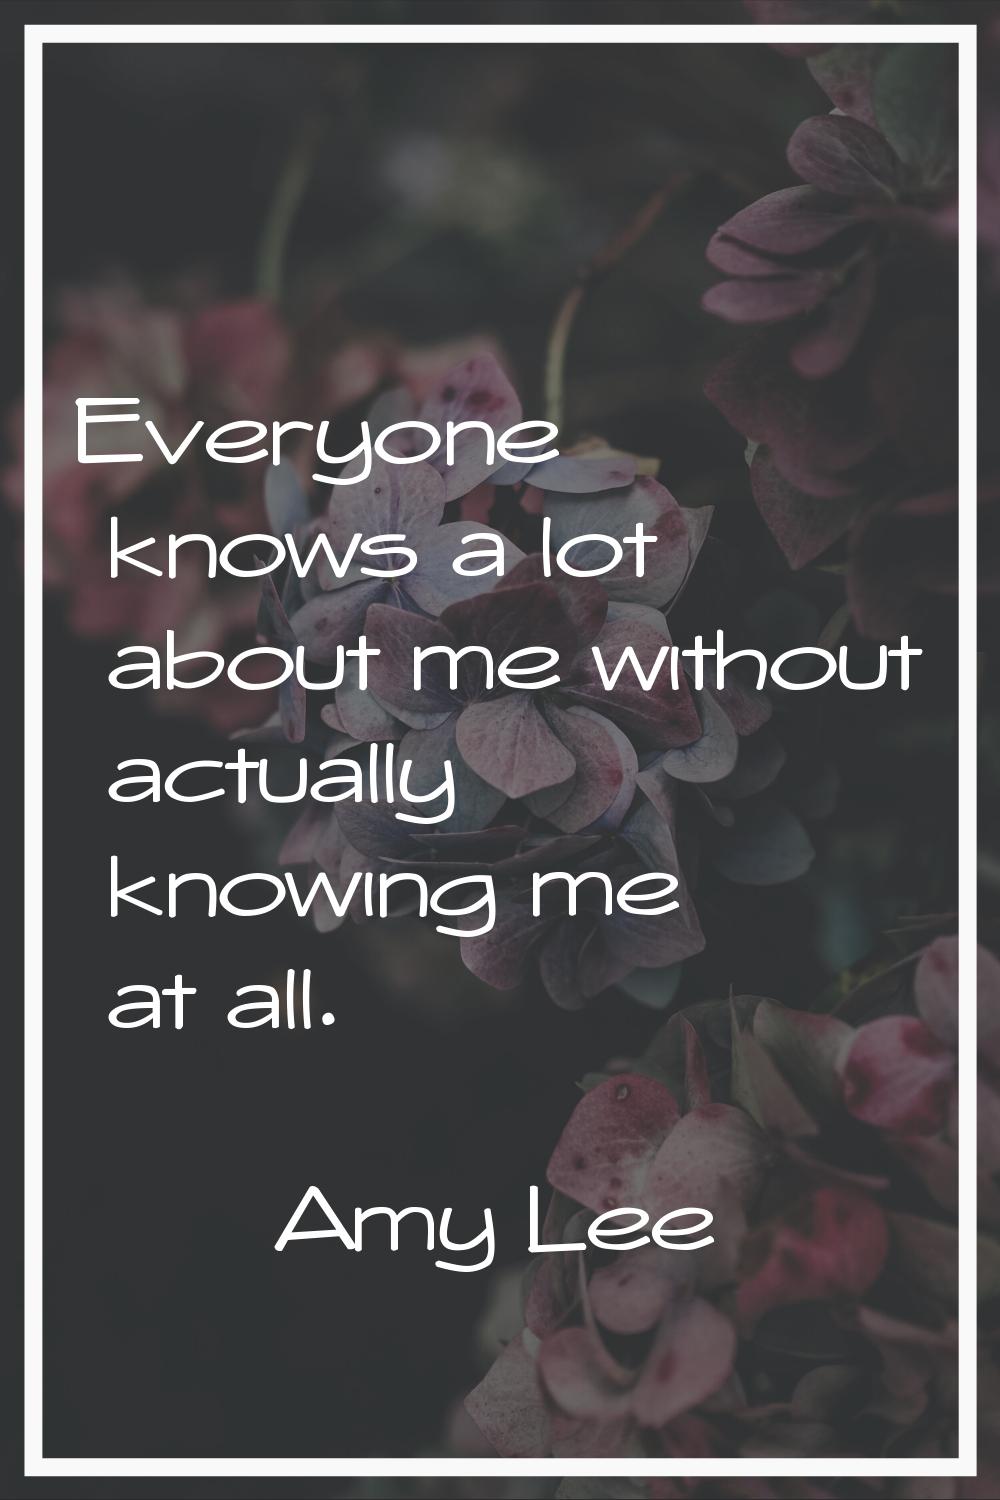 Everyone knows a lot about me without actually knowing me at all.